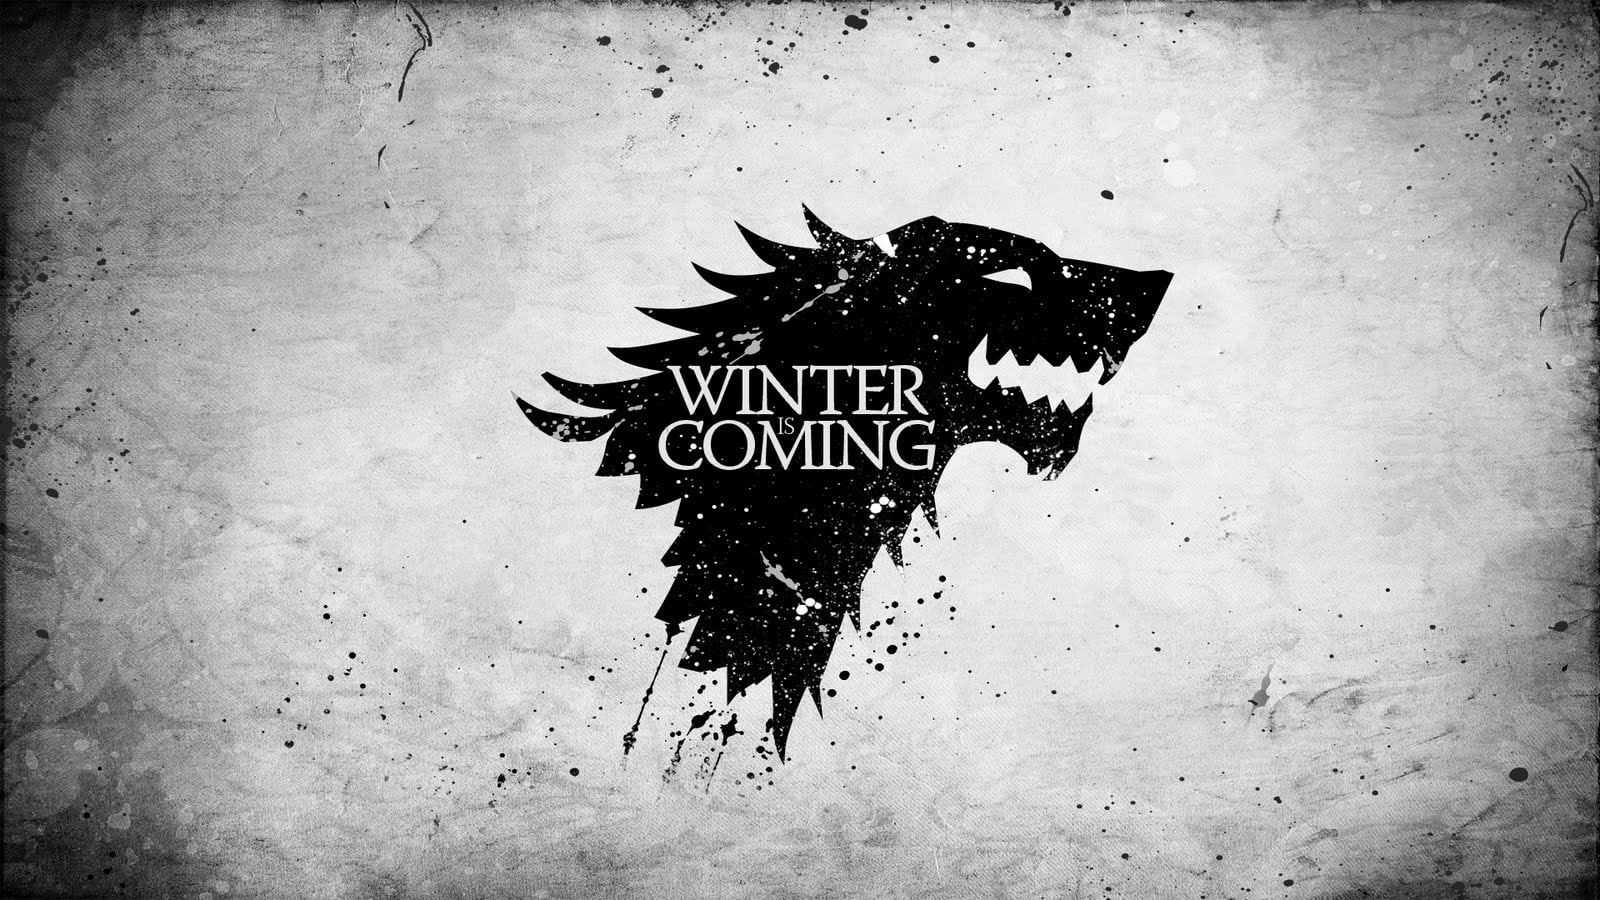 Winter Coming logo, House Stark, Game of Thrones, A Song of Ice and Fire